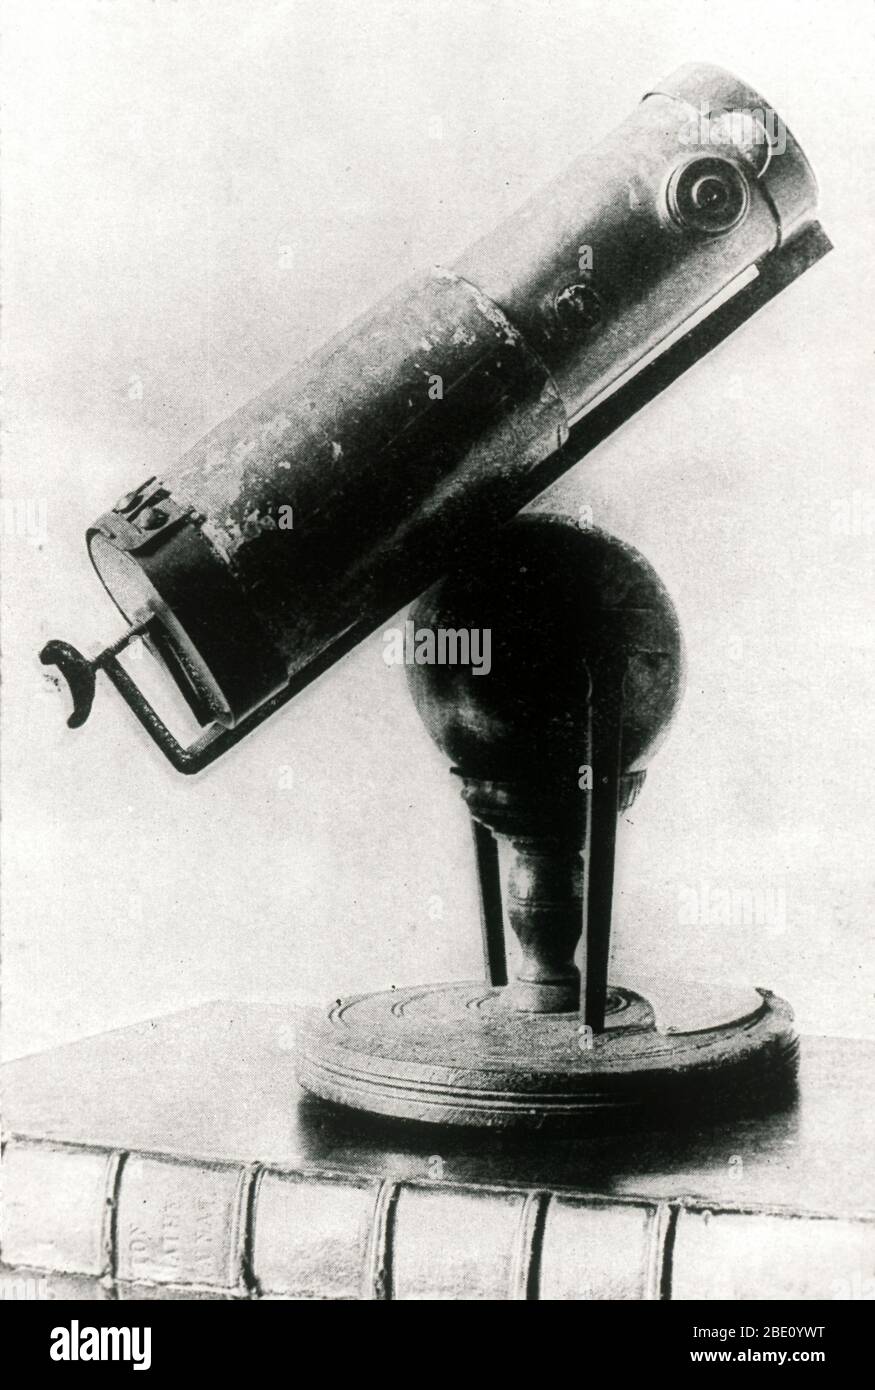 Sir Isaac Newton's reflecting telescope, known also as the Newtonian  telescope. It worked by concentrating light by reflection from a parabolic  mirror, instead of by refraction through a lens. Newton (1642-1727) first